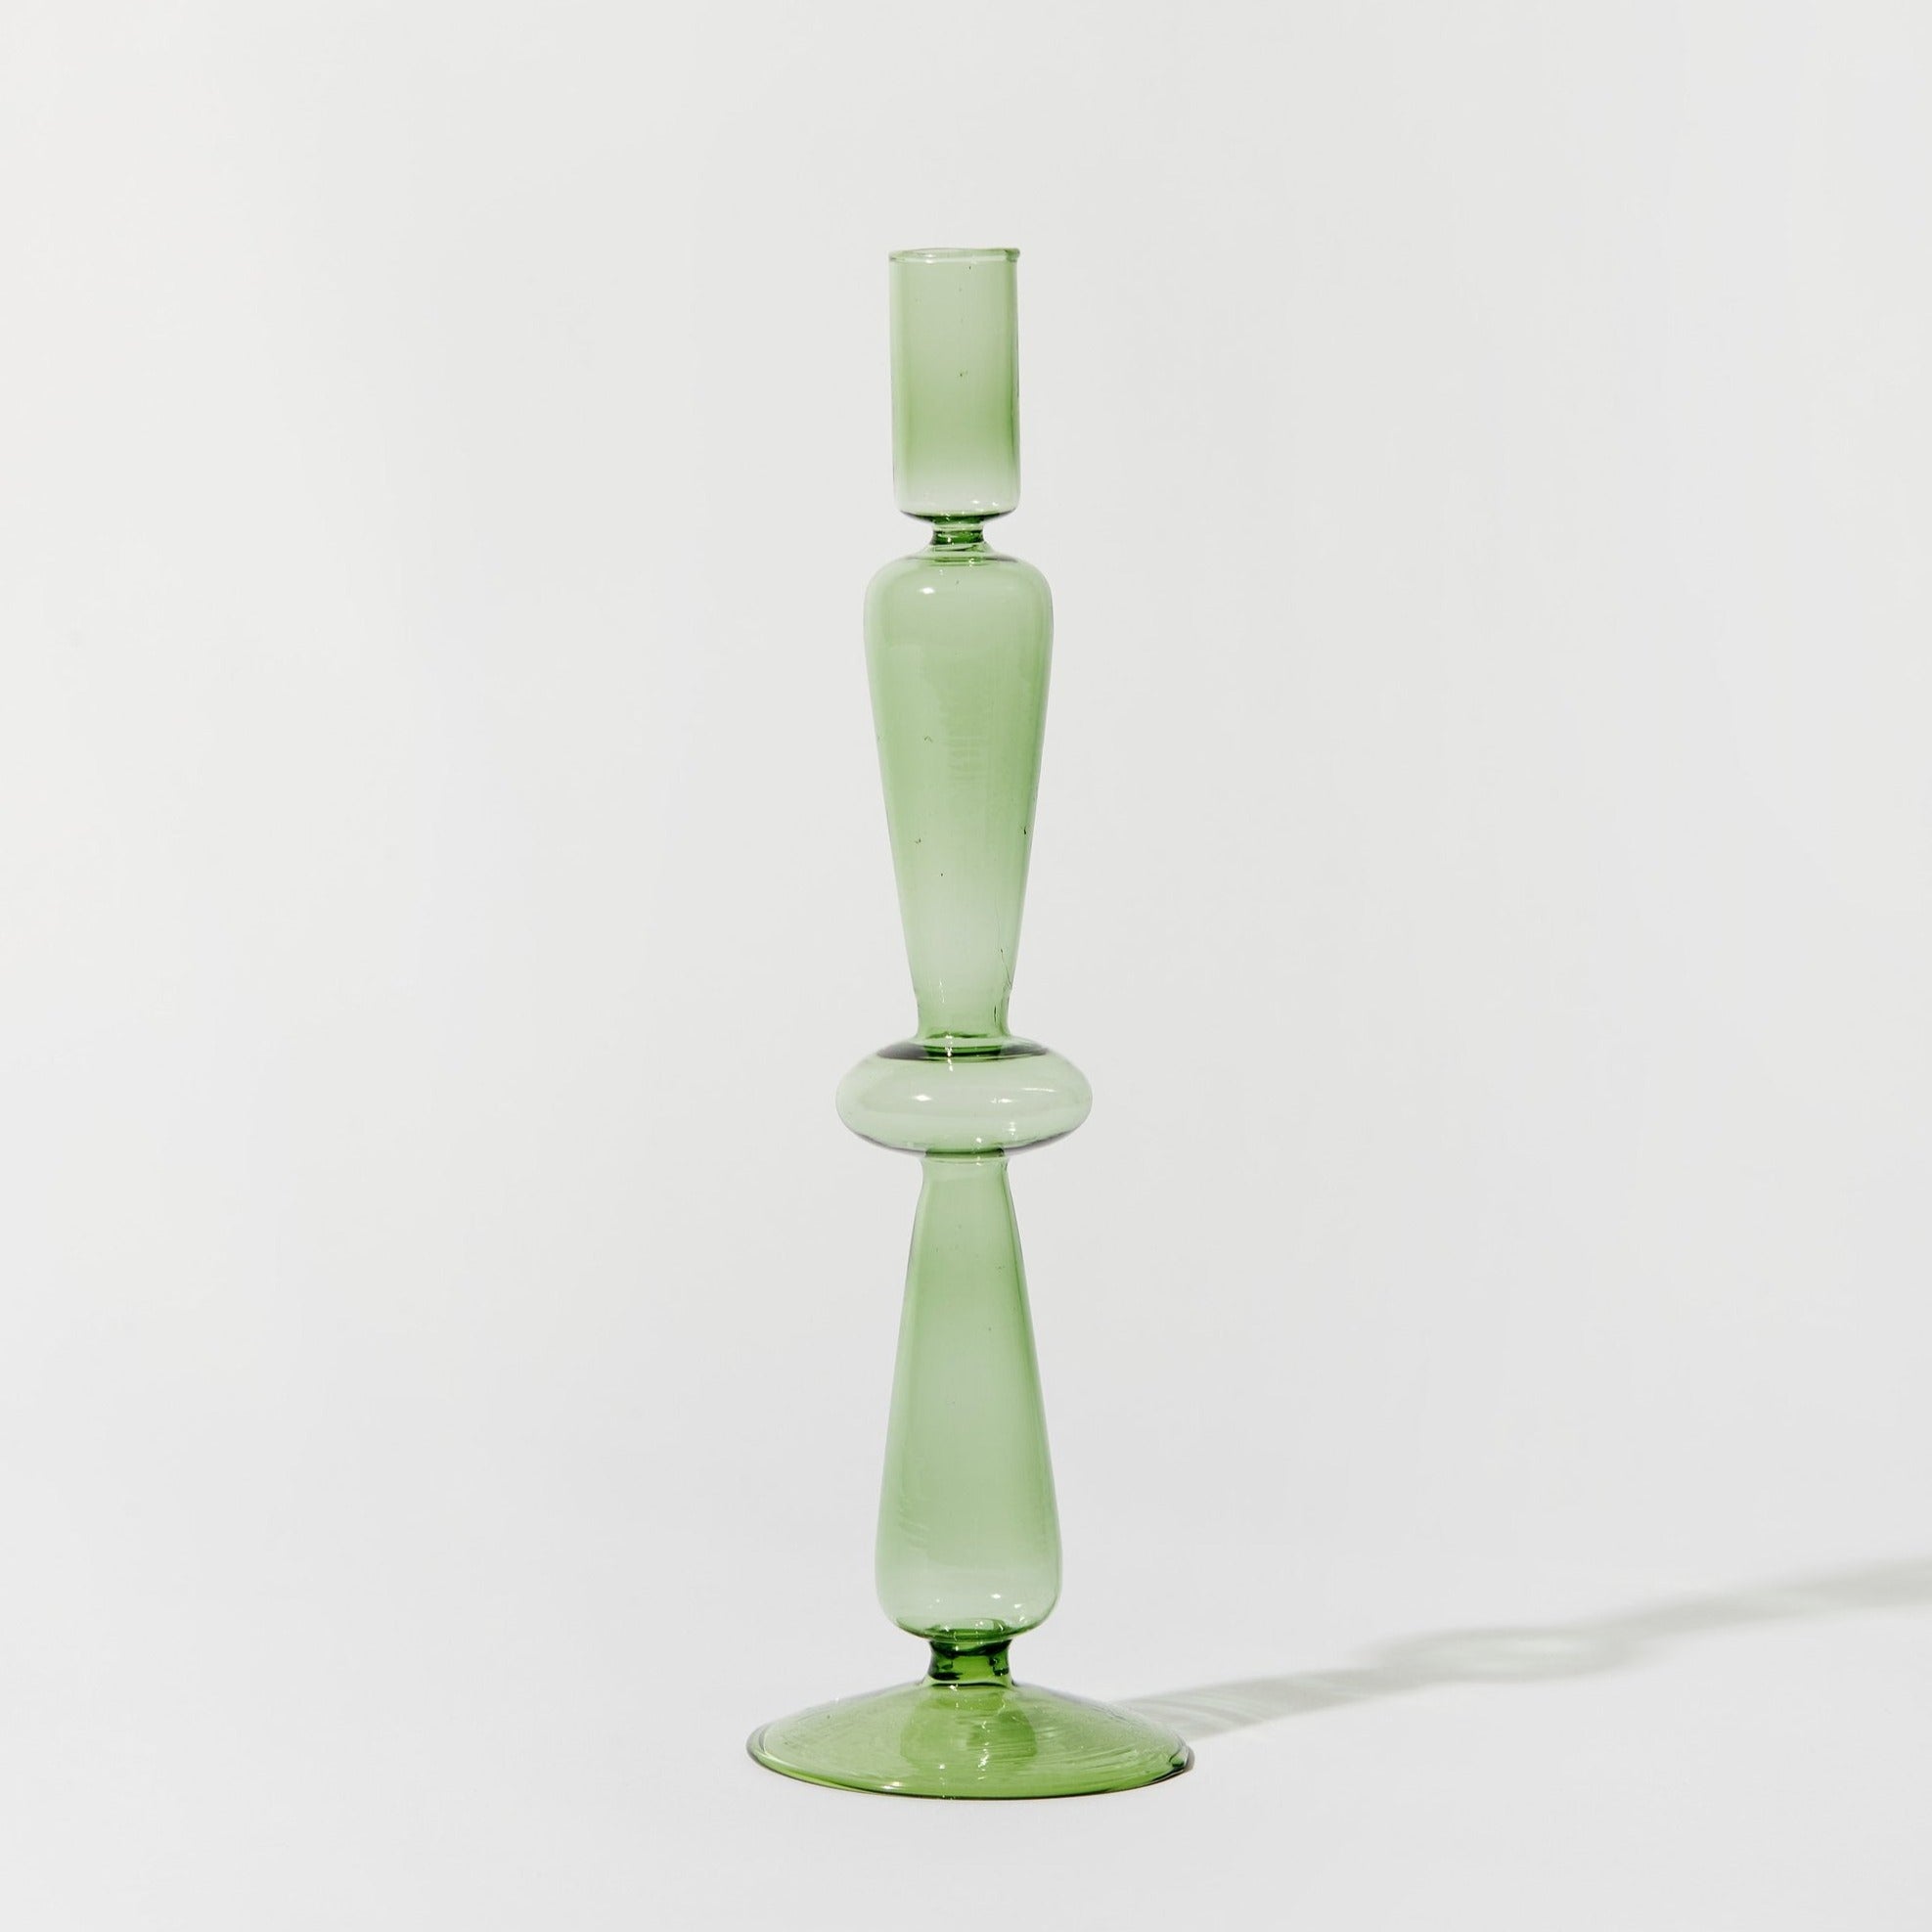 Aeyre - Fisca Candlestick Holder